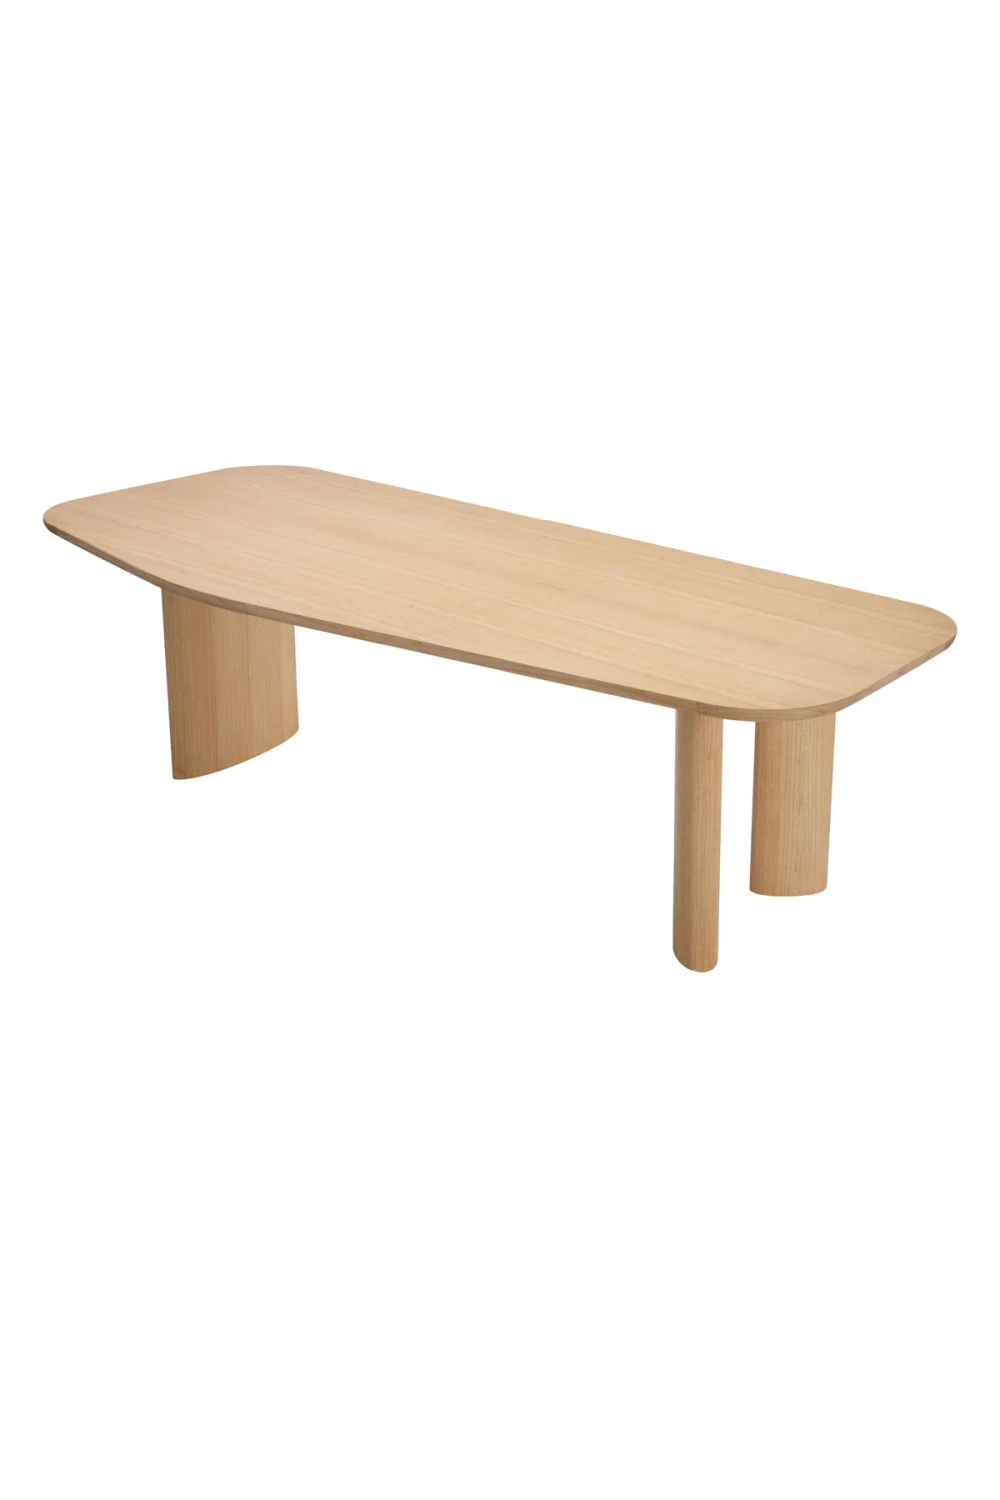 The Free Form Table